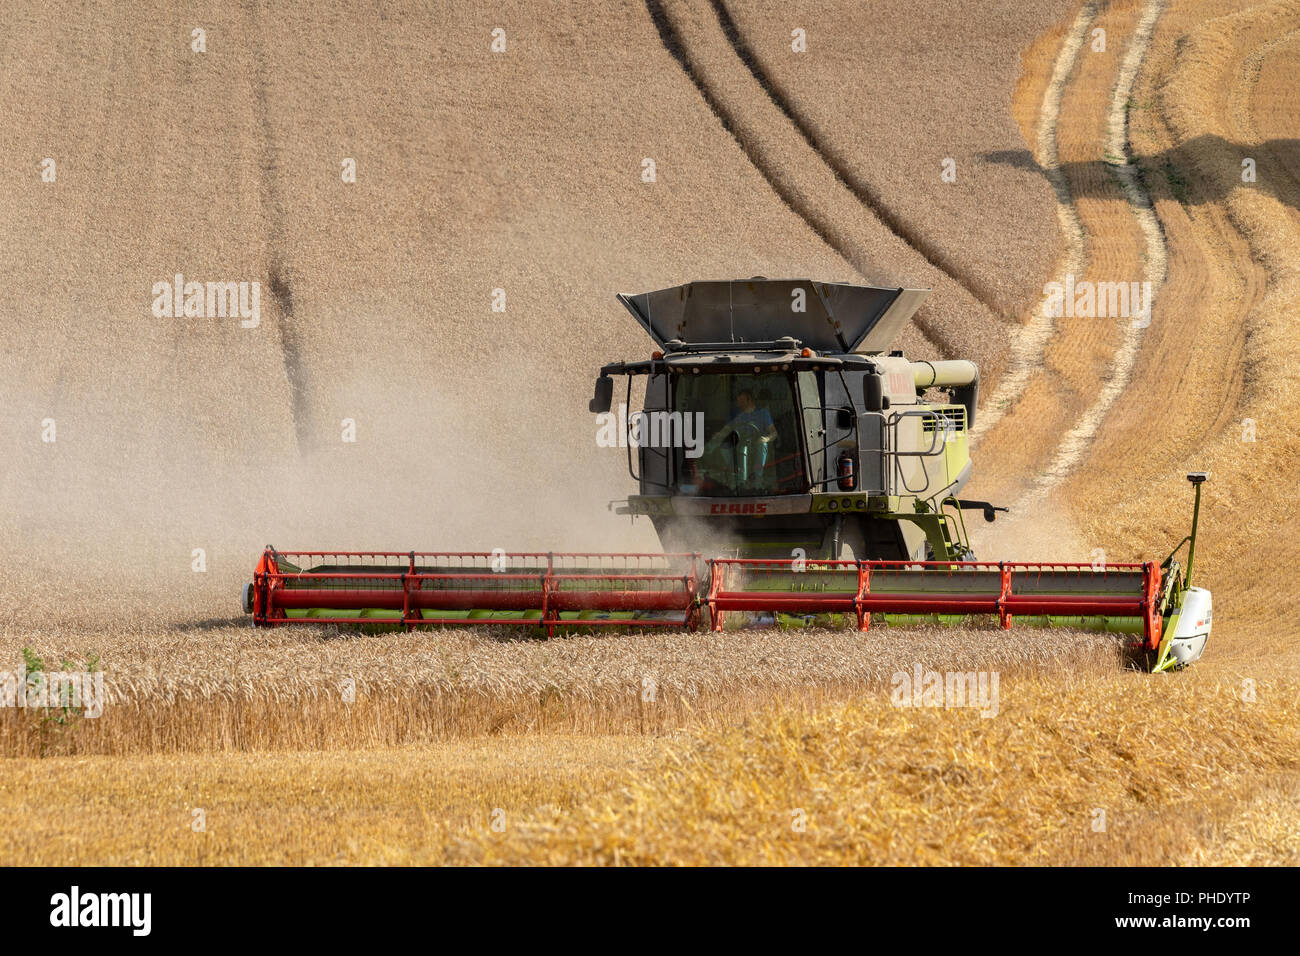 Combine harvester cutting a crop of wheat on farmland in North Yorkshire, England. Stock Photo